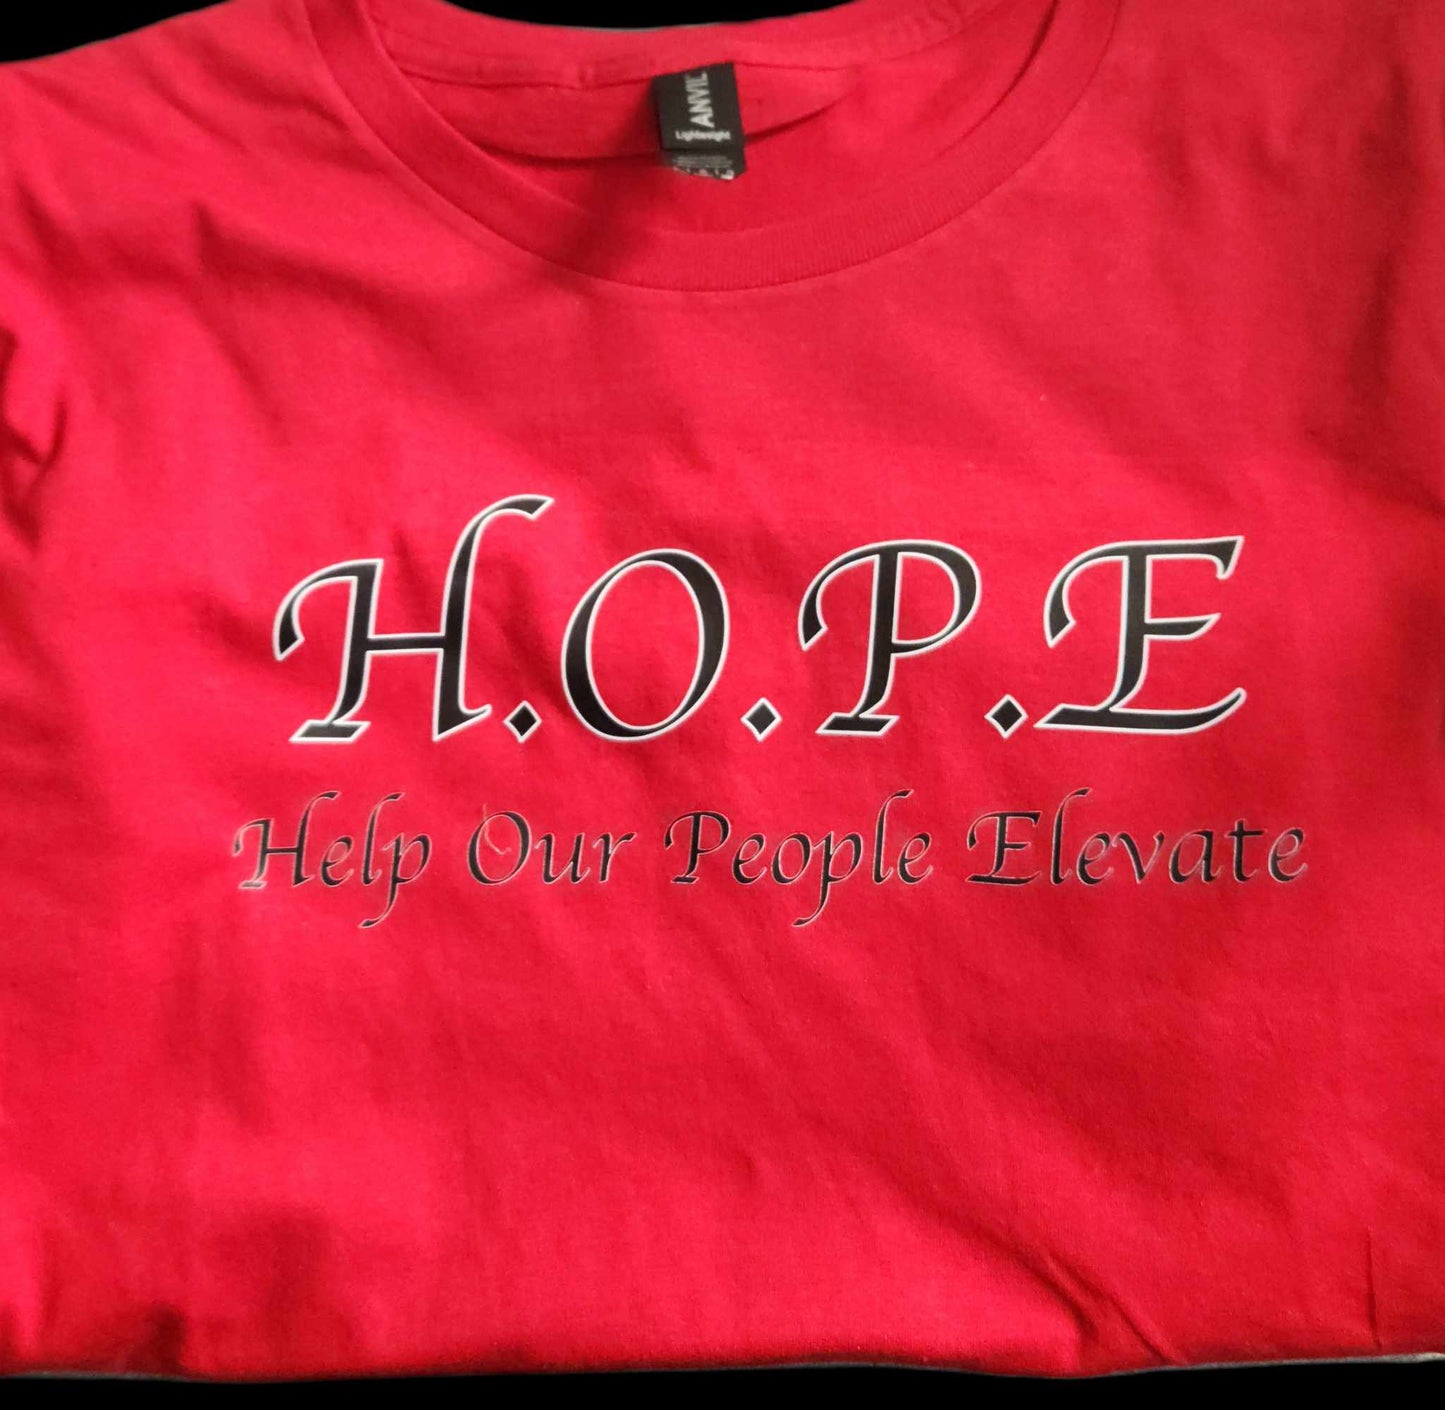 H.O.P.E - Help Our People Elevate